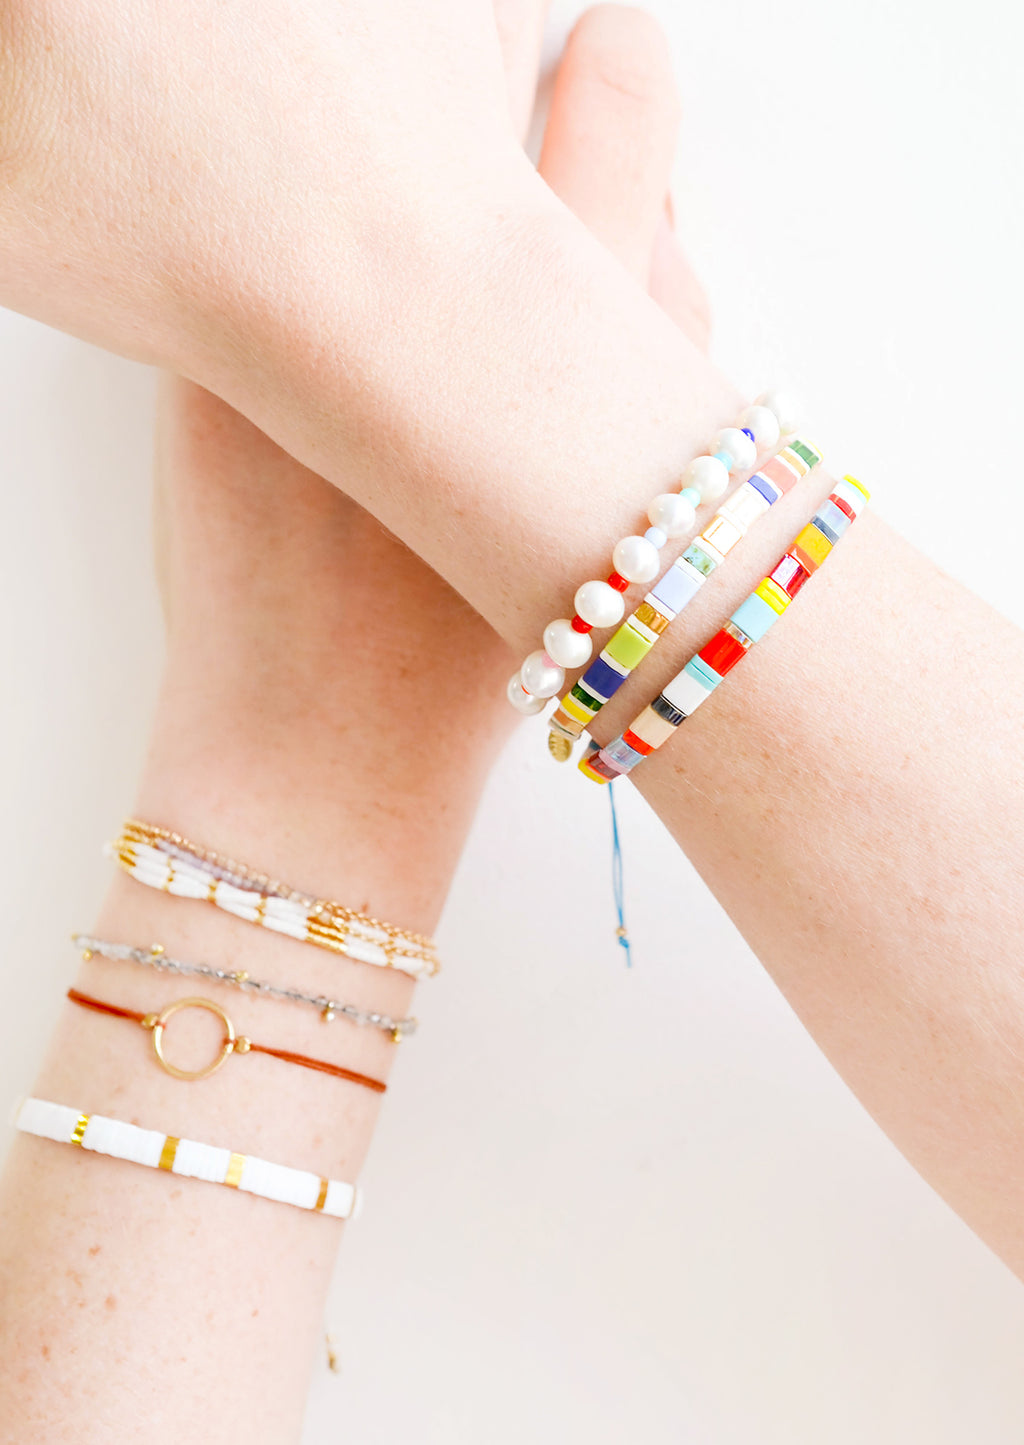 6: Model shot showing wrists with multiple styles of bracelets.